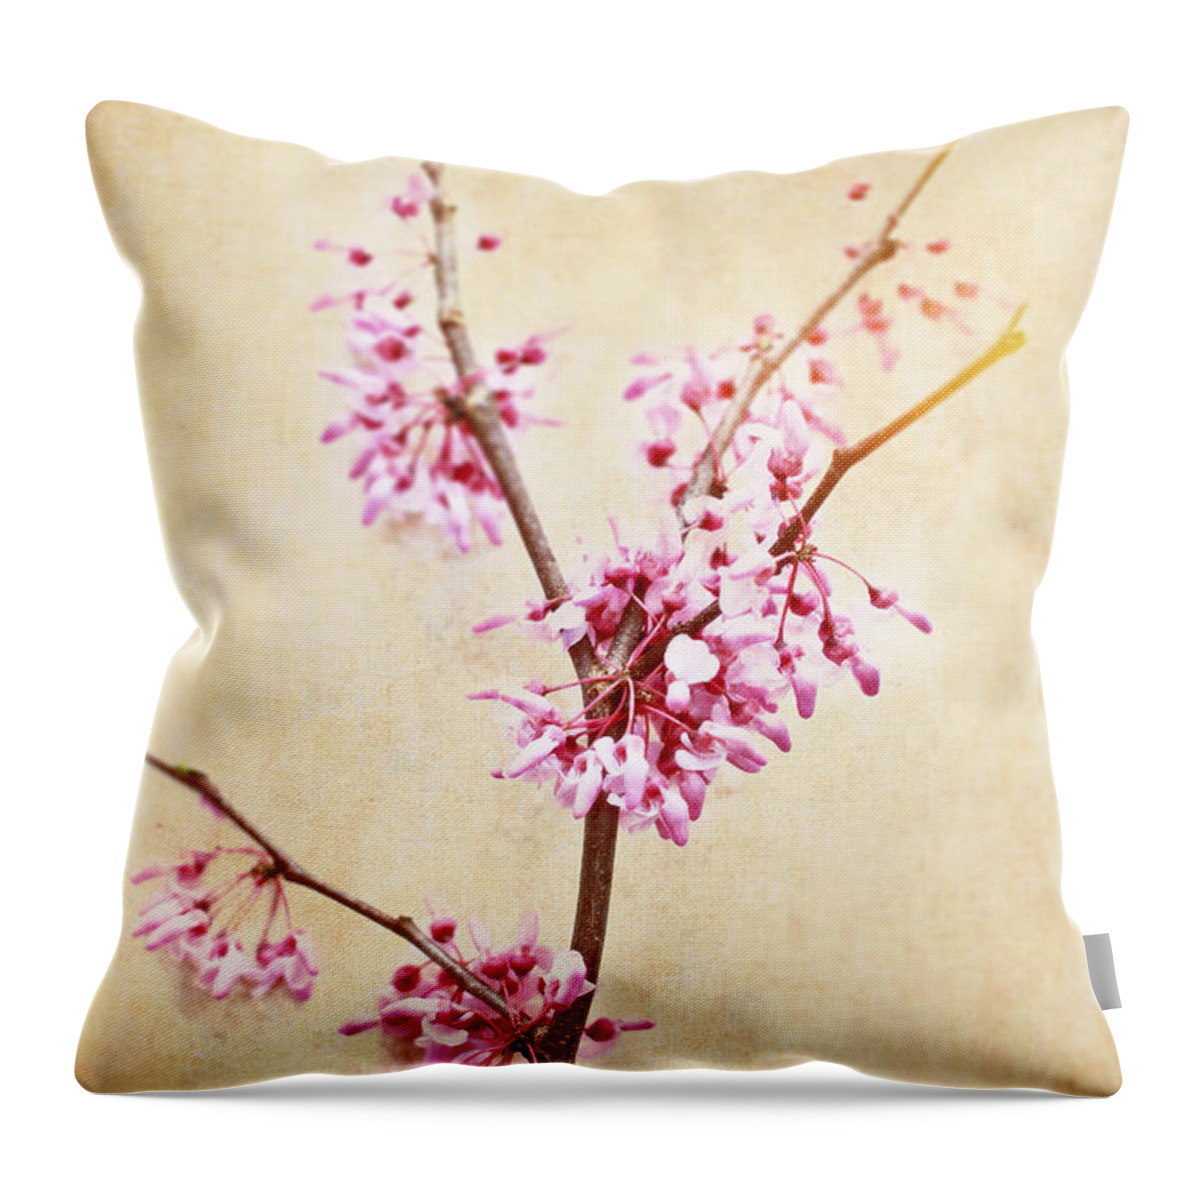 Crab Apple Throw Pillow featuring the photograph Apple Blossoms #1 by Stephanie Frey